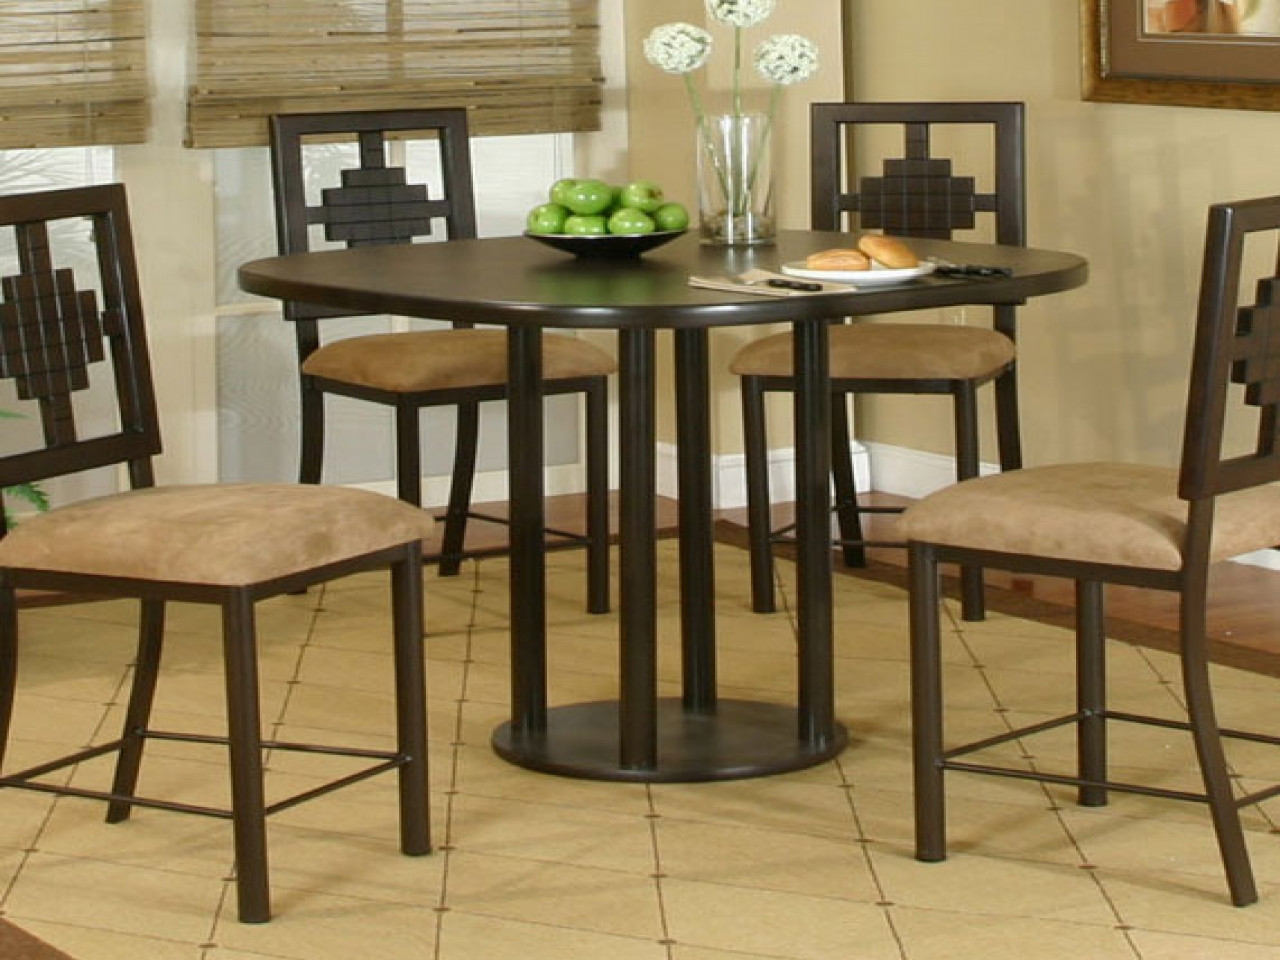 Small Kitchen Dinette Sets
 Small kitchen dining table and chairs small kitchen